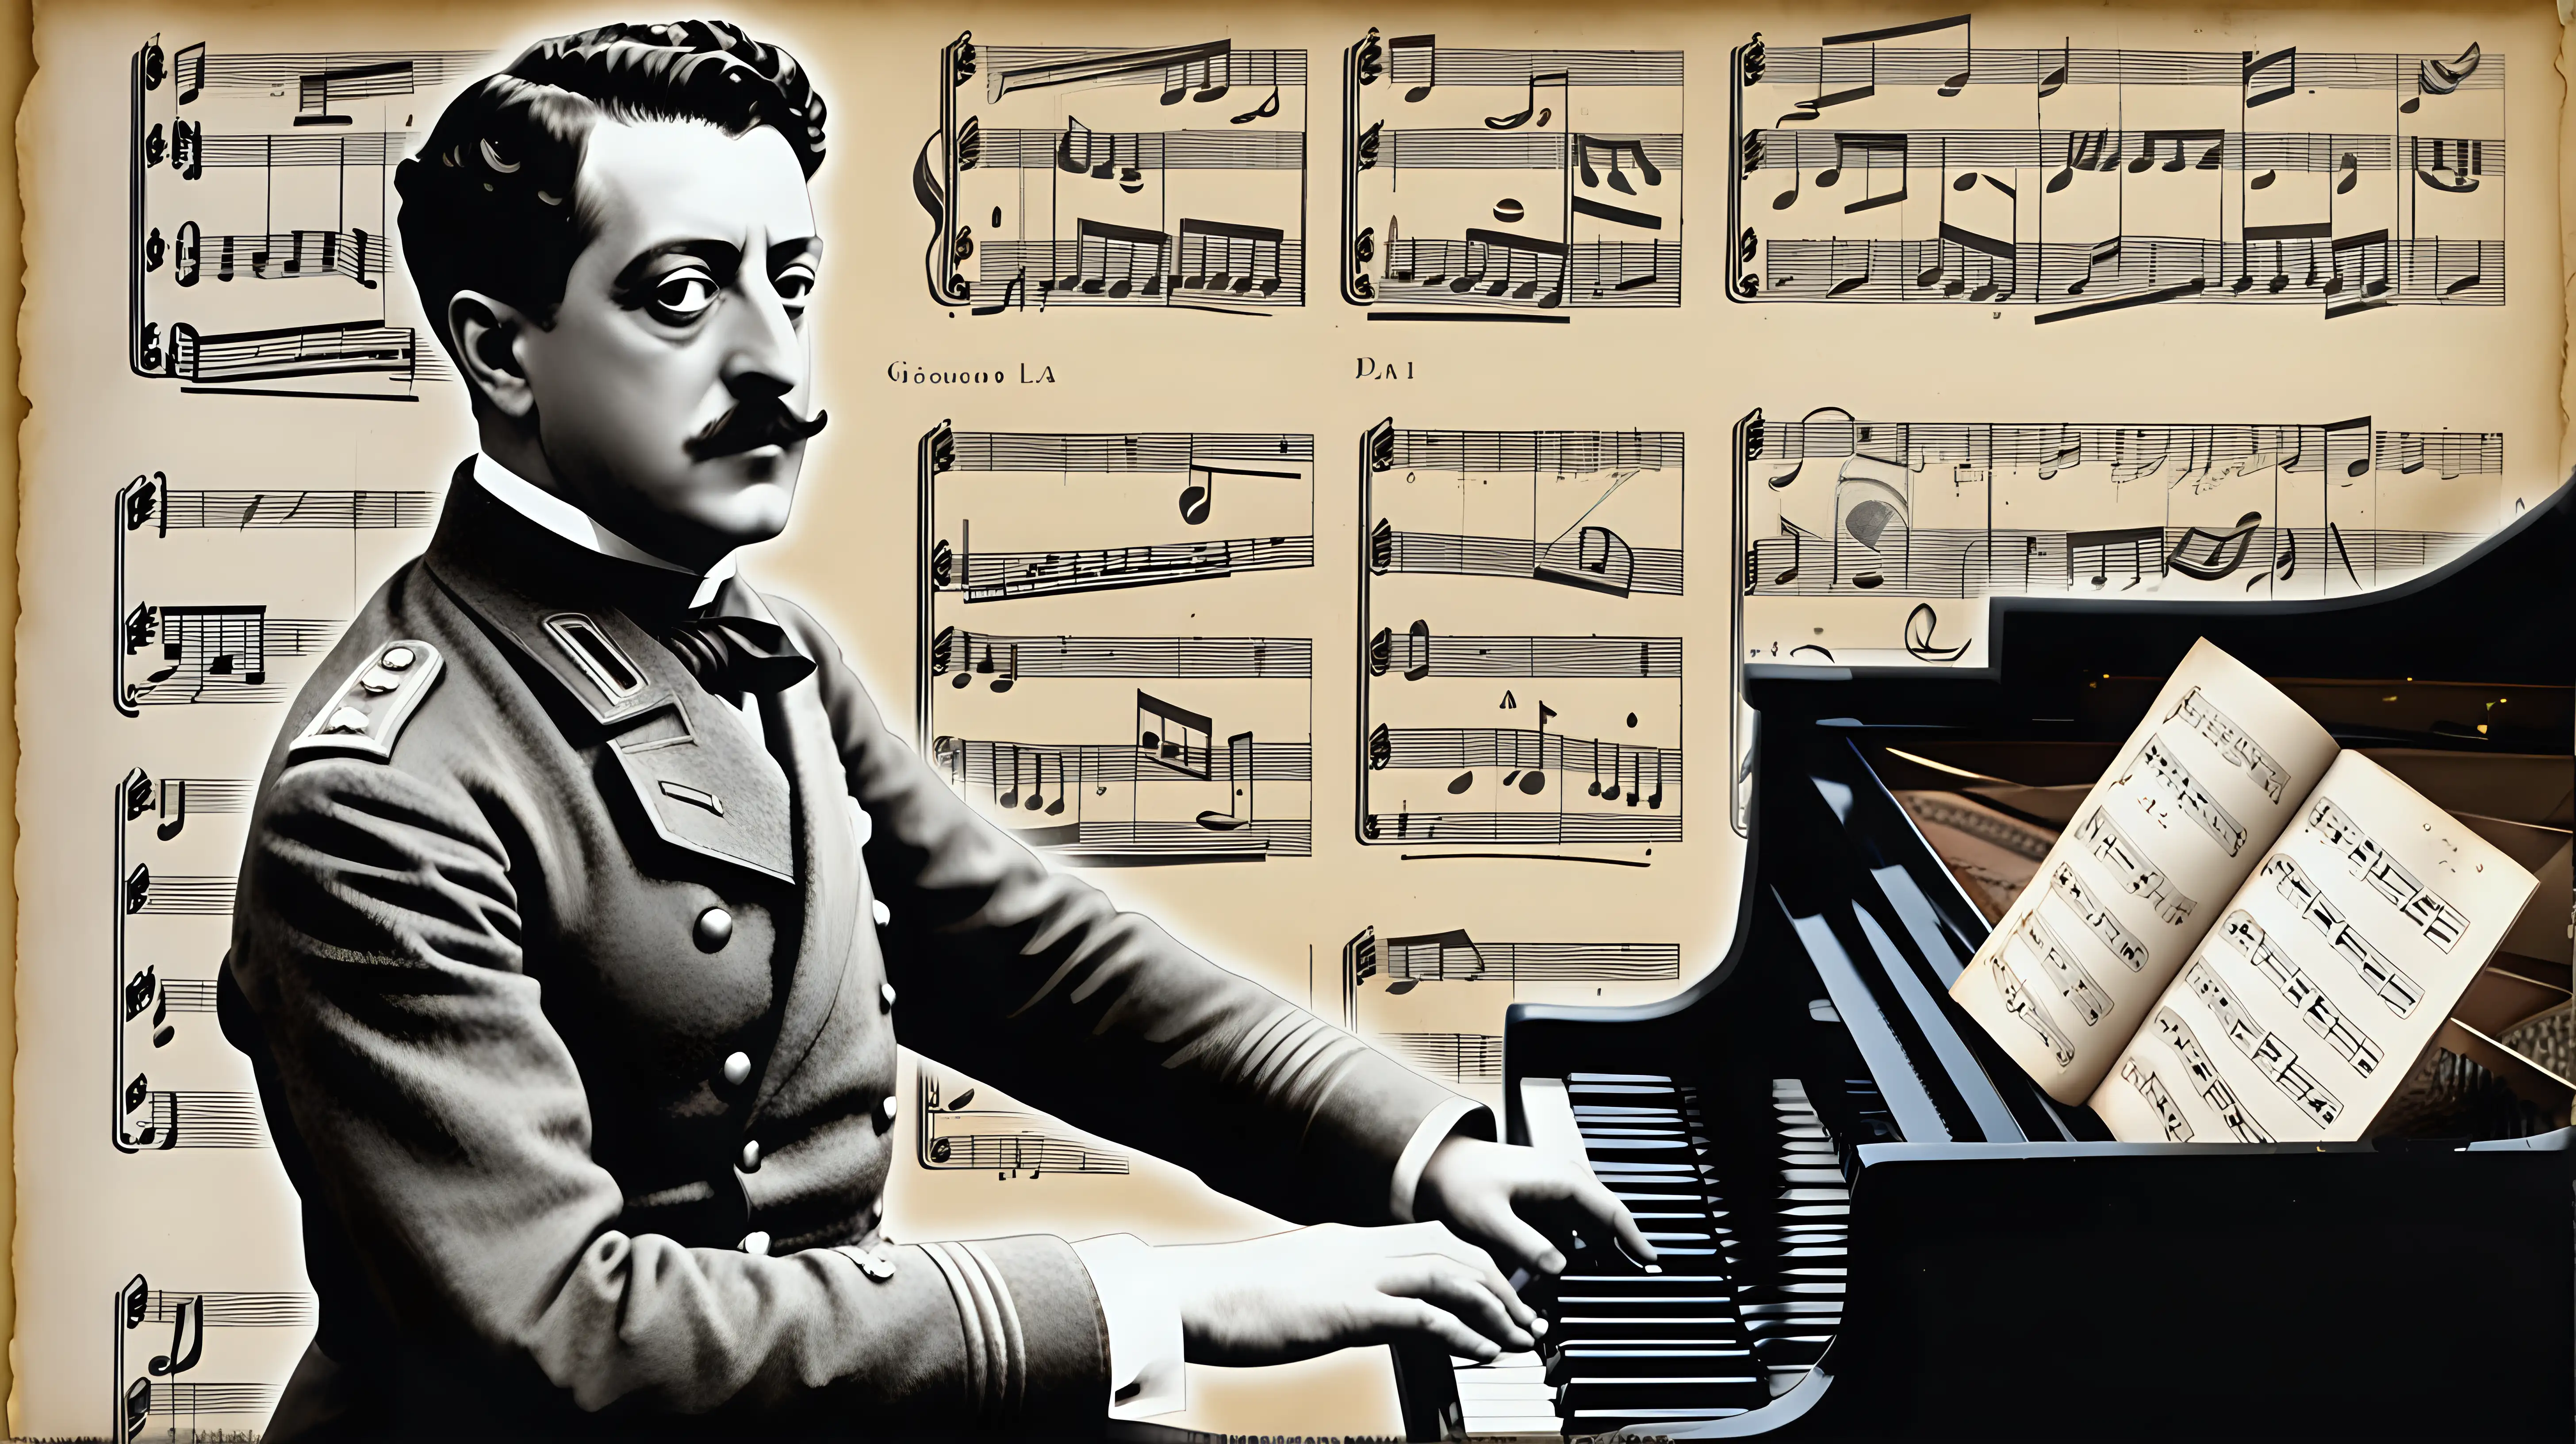 1917. During the ww1 Giacomo Puccini at piano compose La Rondine. Style as an old dada collage, with the notes, soldiers, musical references